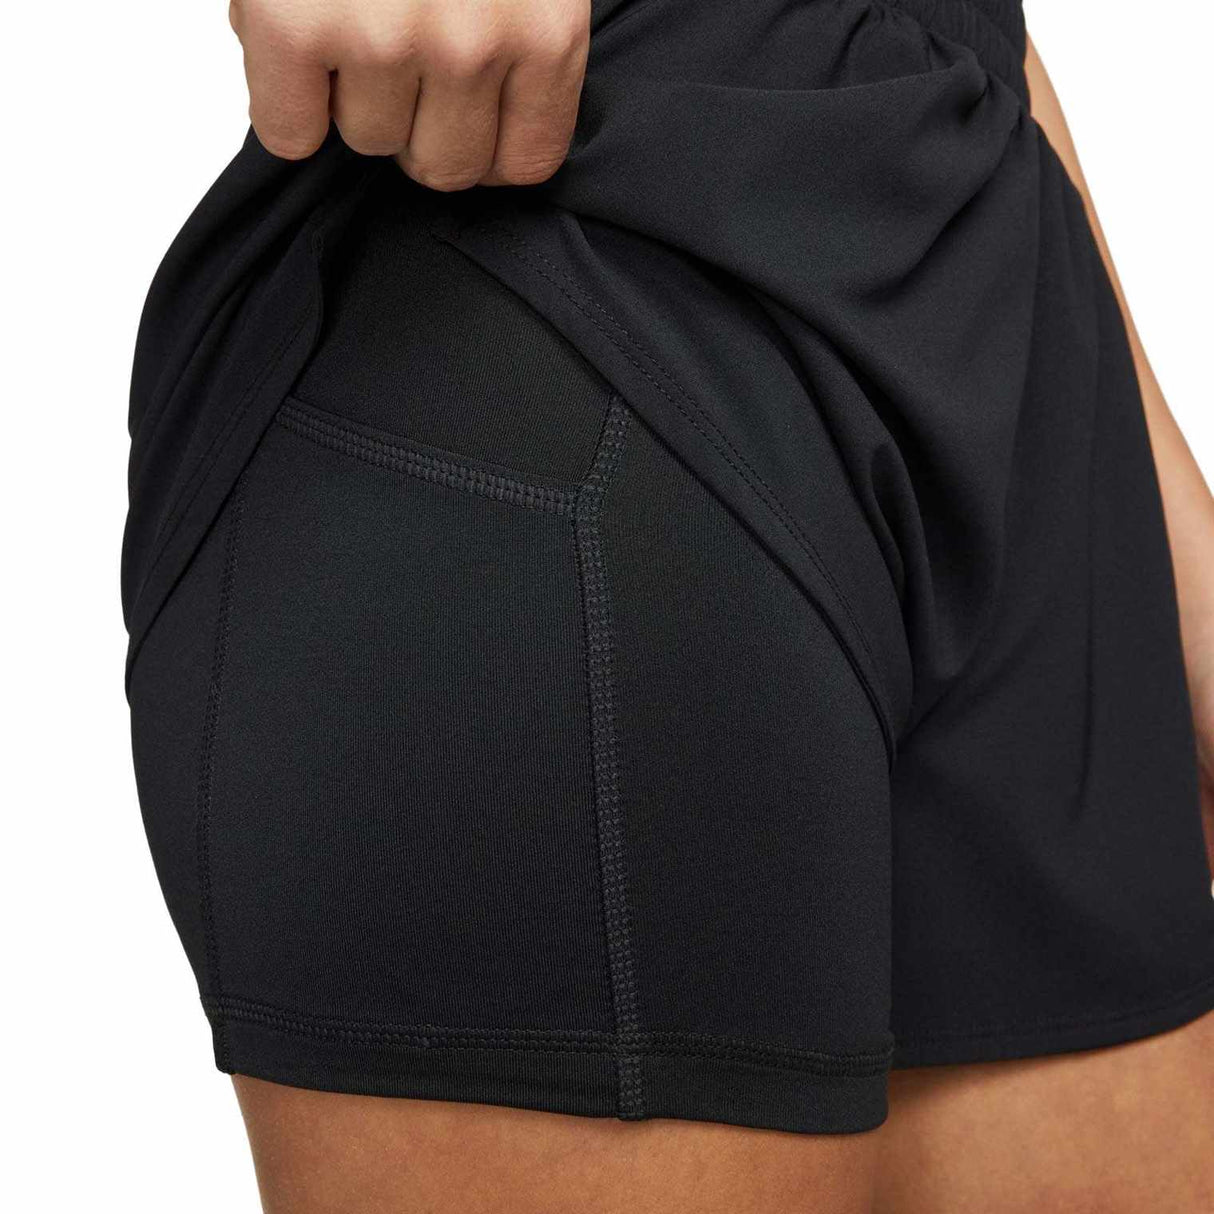 Nike One Womens Dri-FIT High-Waisted 3 2-in-1 Shorts